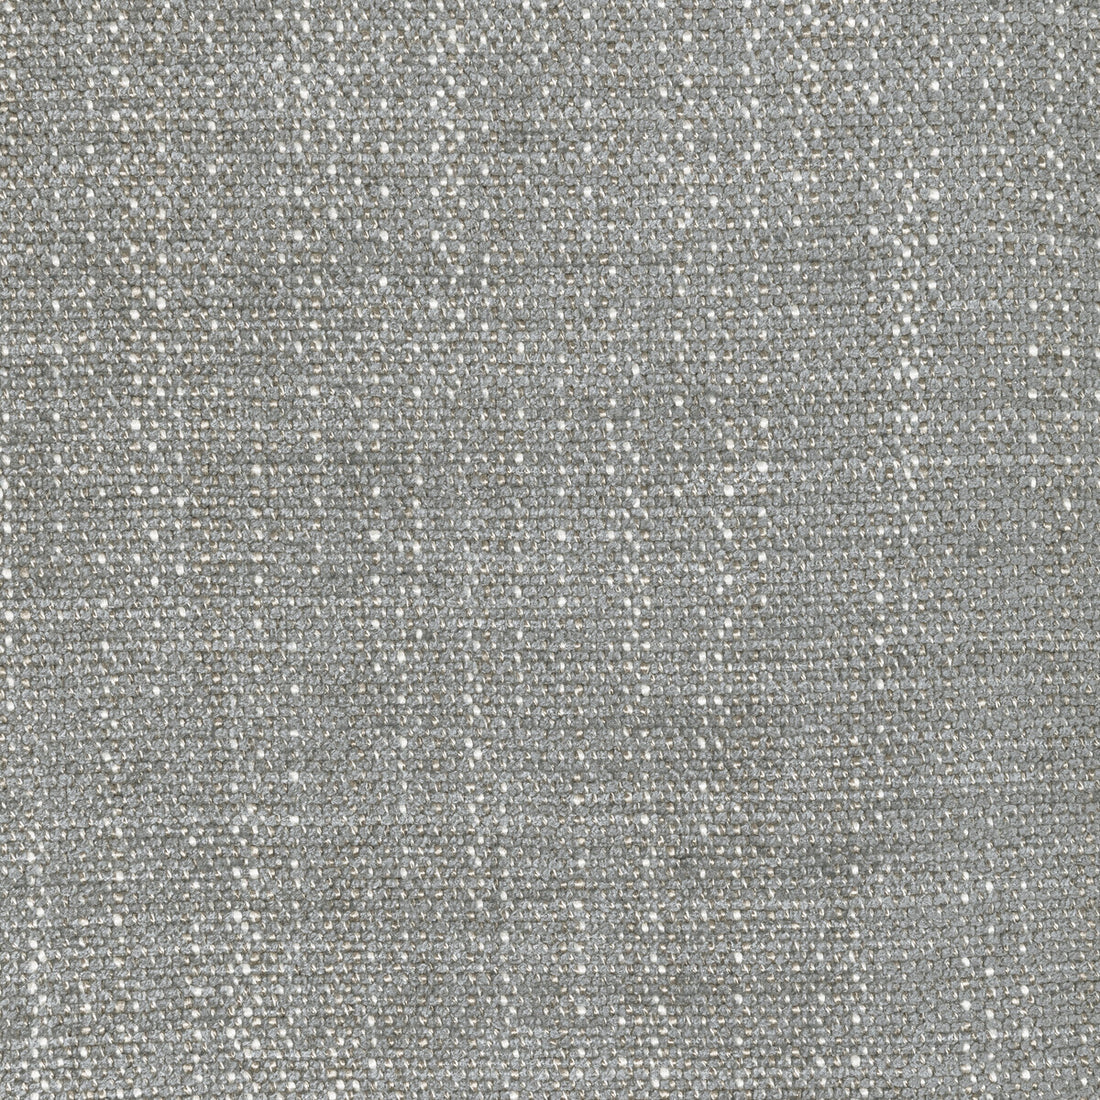 Kravet Couture fabric in 36597-52 color - pattern 36597.52.0 - by Kravet Couture in the Mabley Handler collection